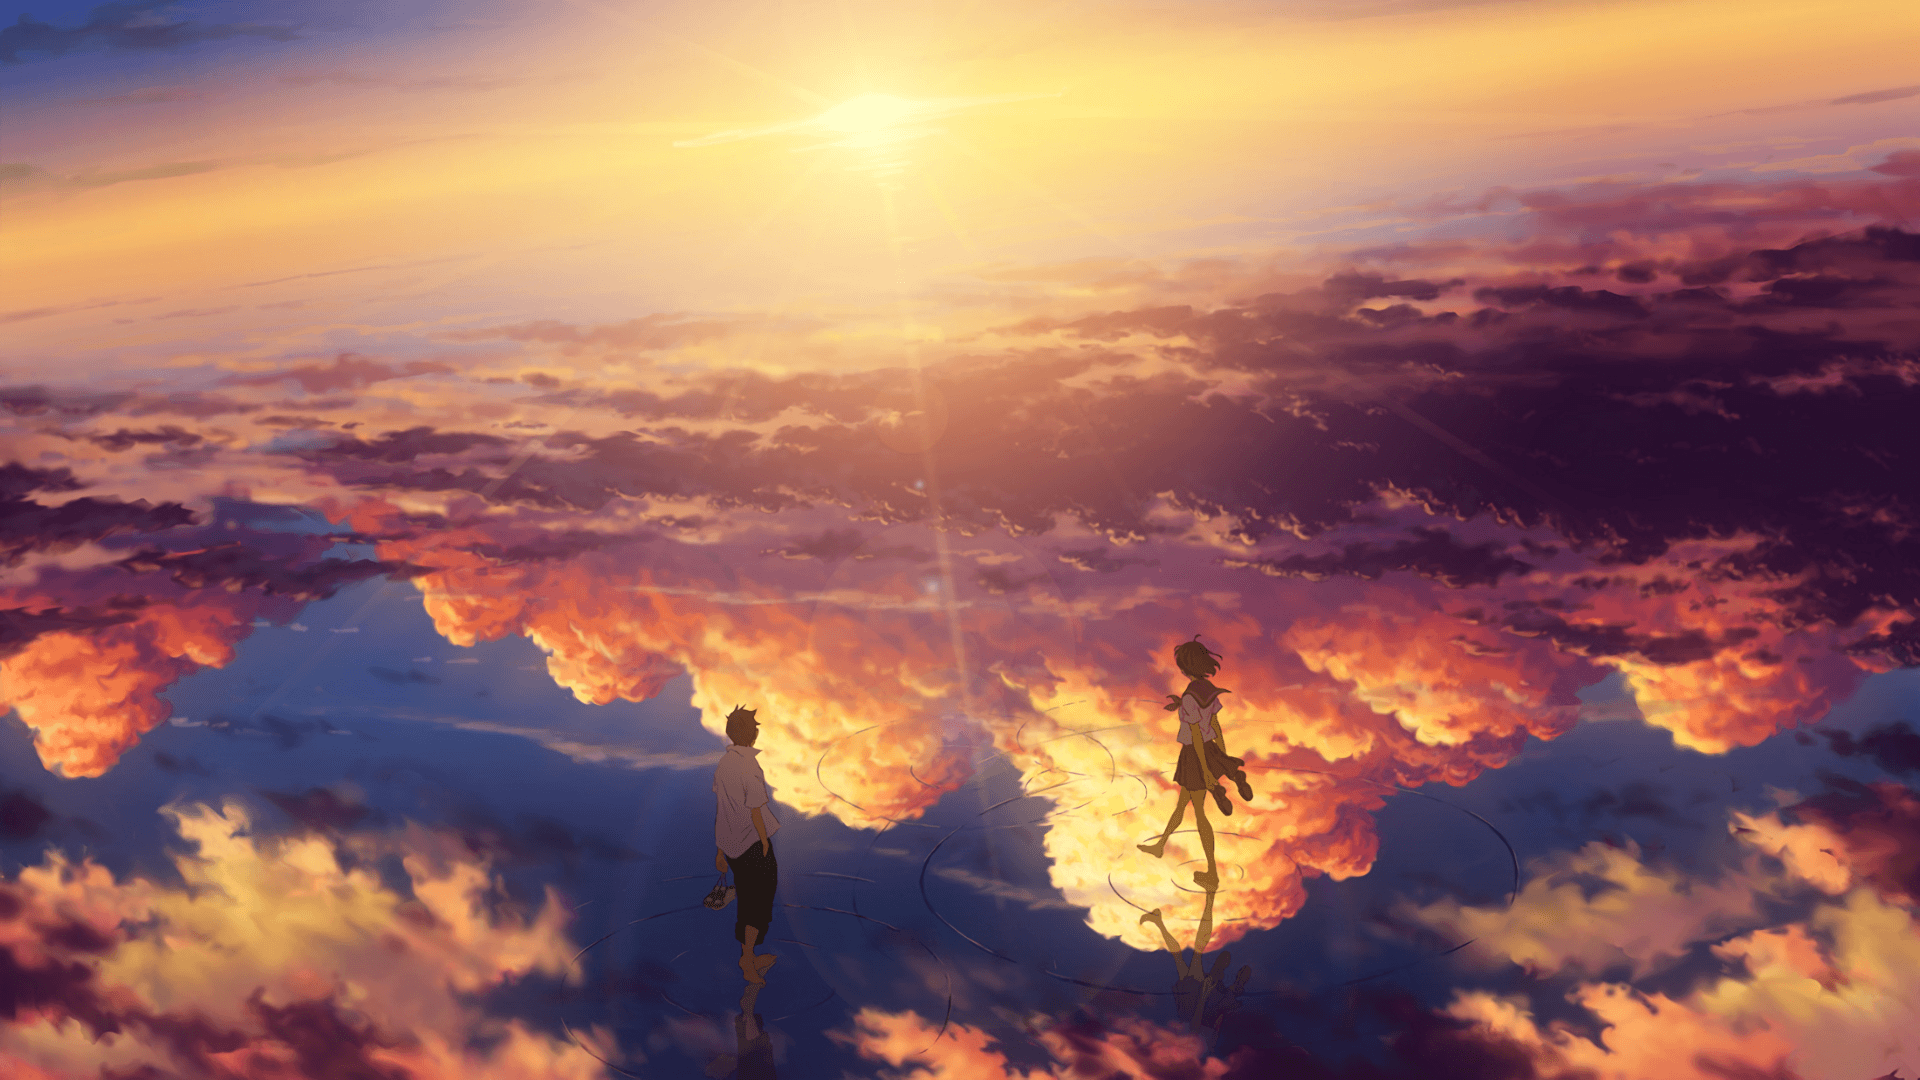 Download 1920x1080 Anime Landscape, Beyond The Clouds